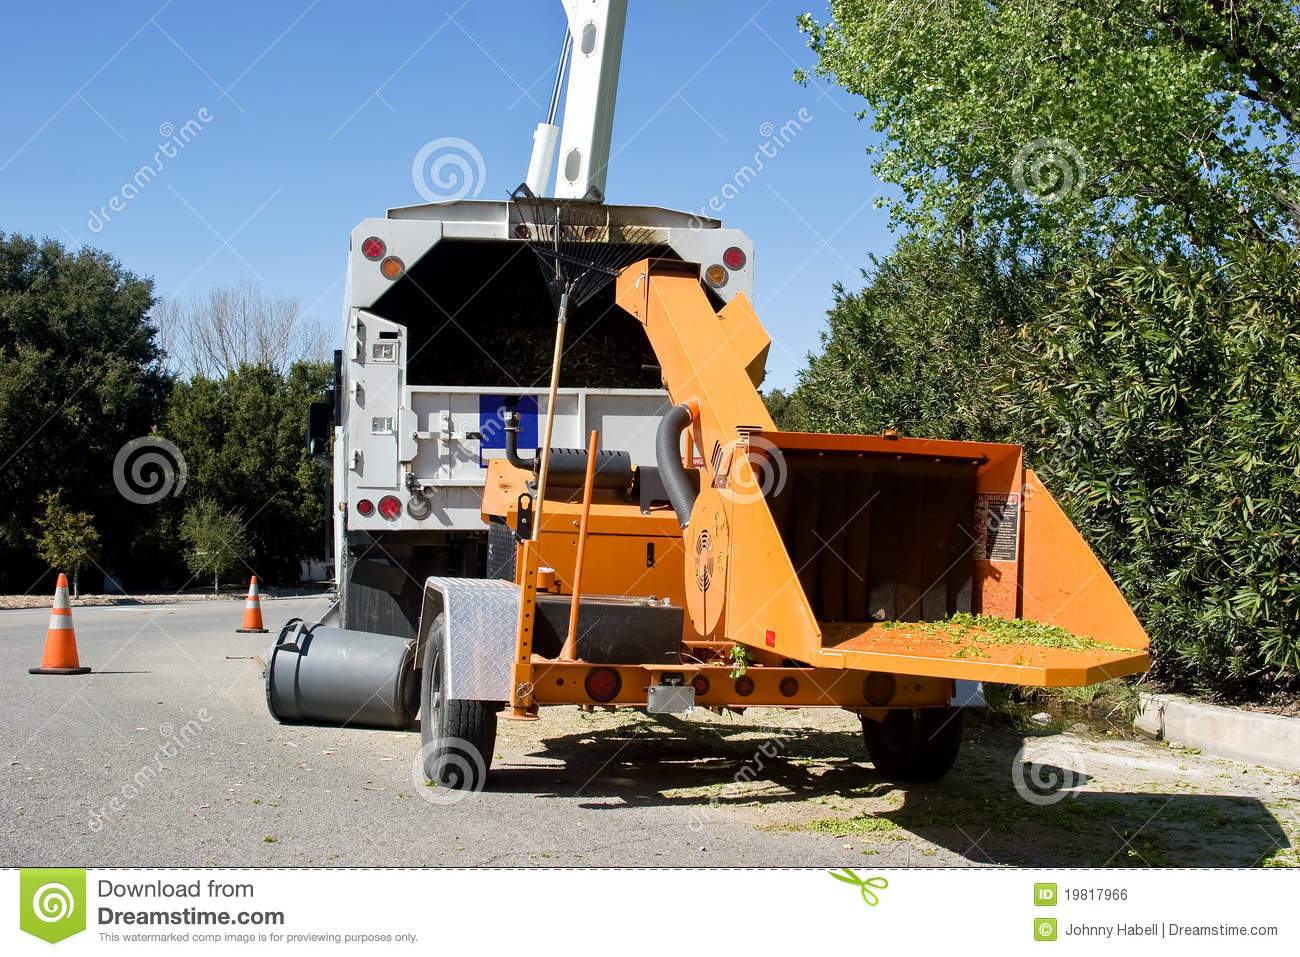 Wood Chipper Royalty Free Stock Image   Image  19817966